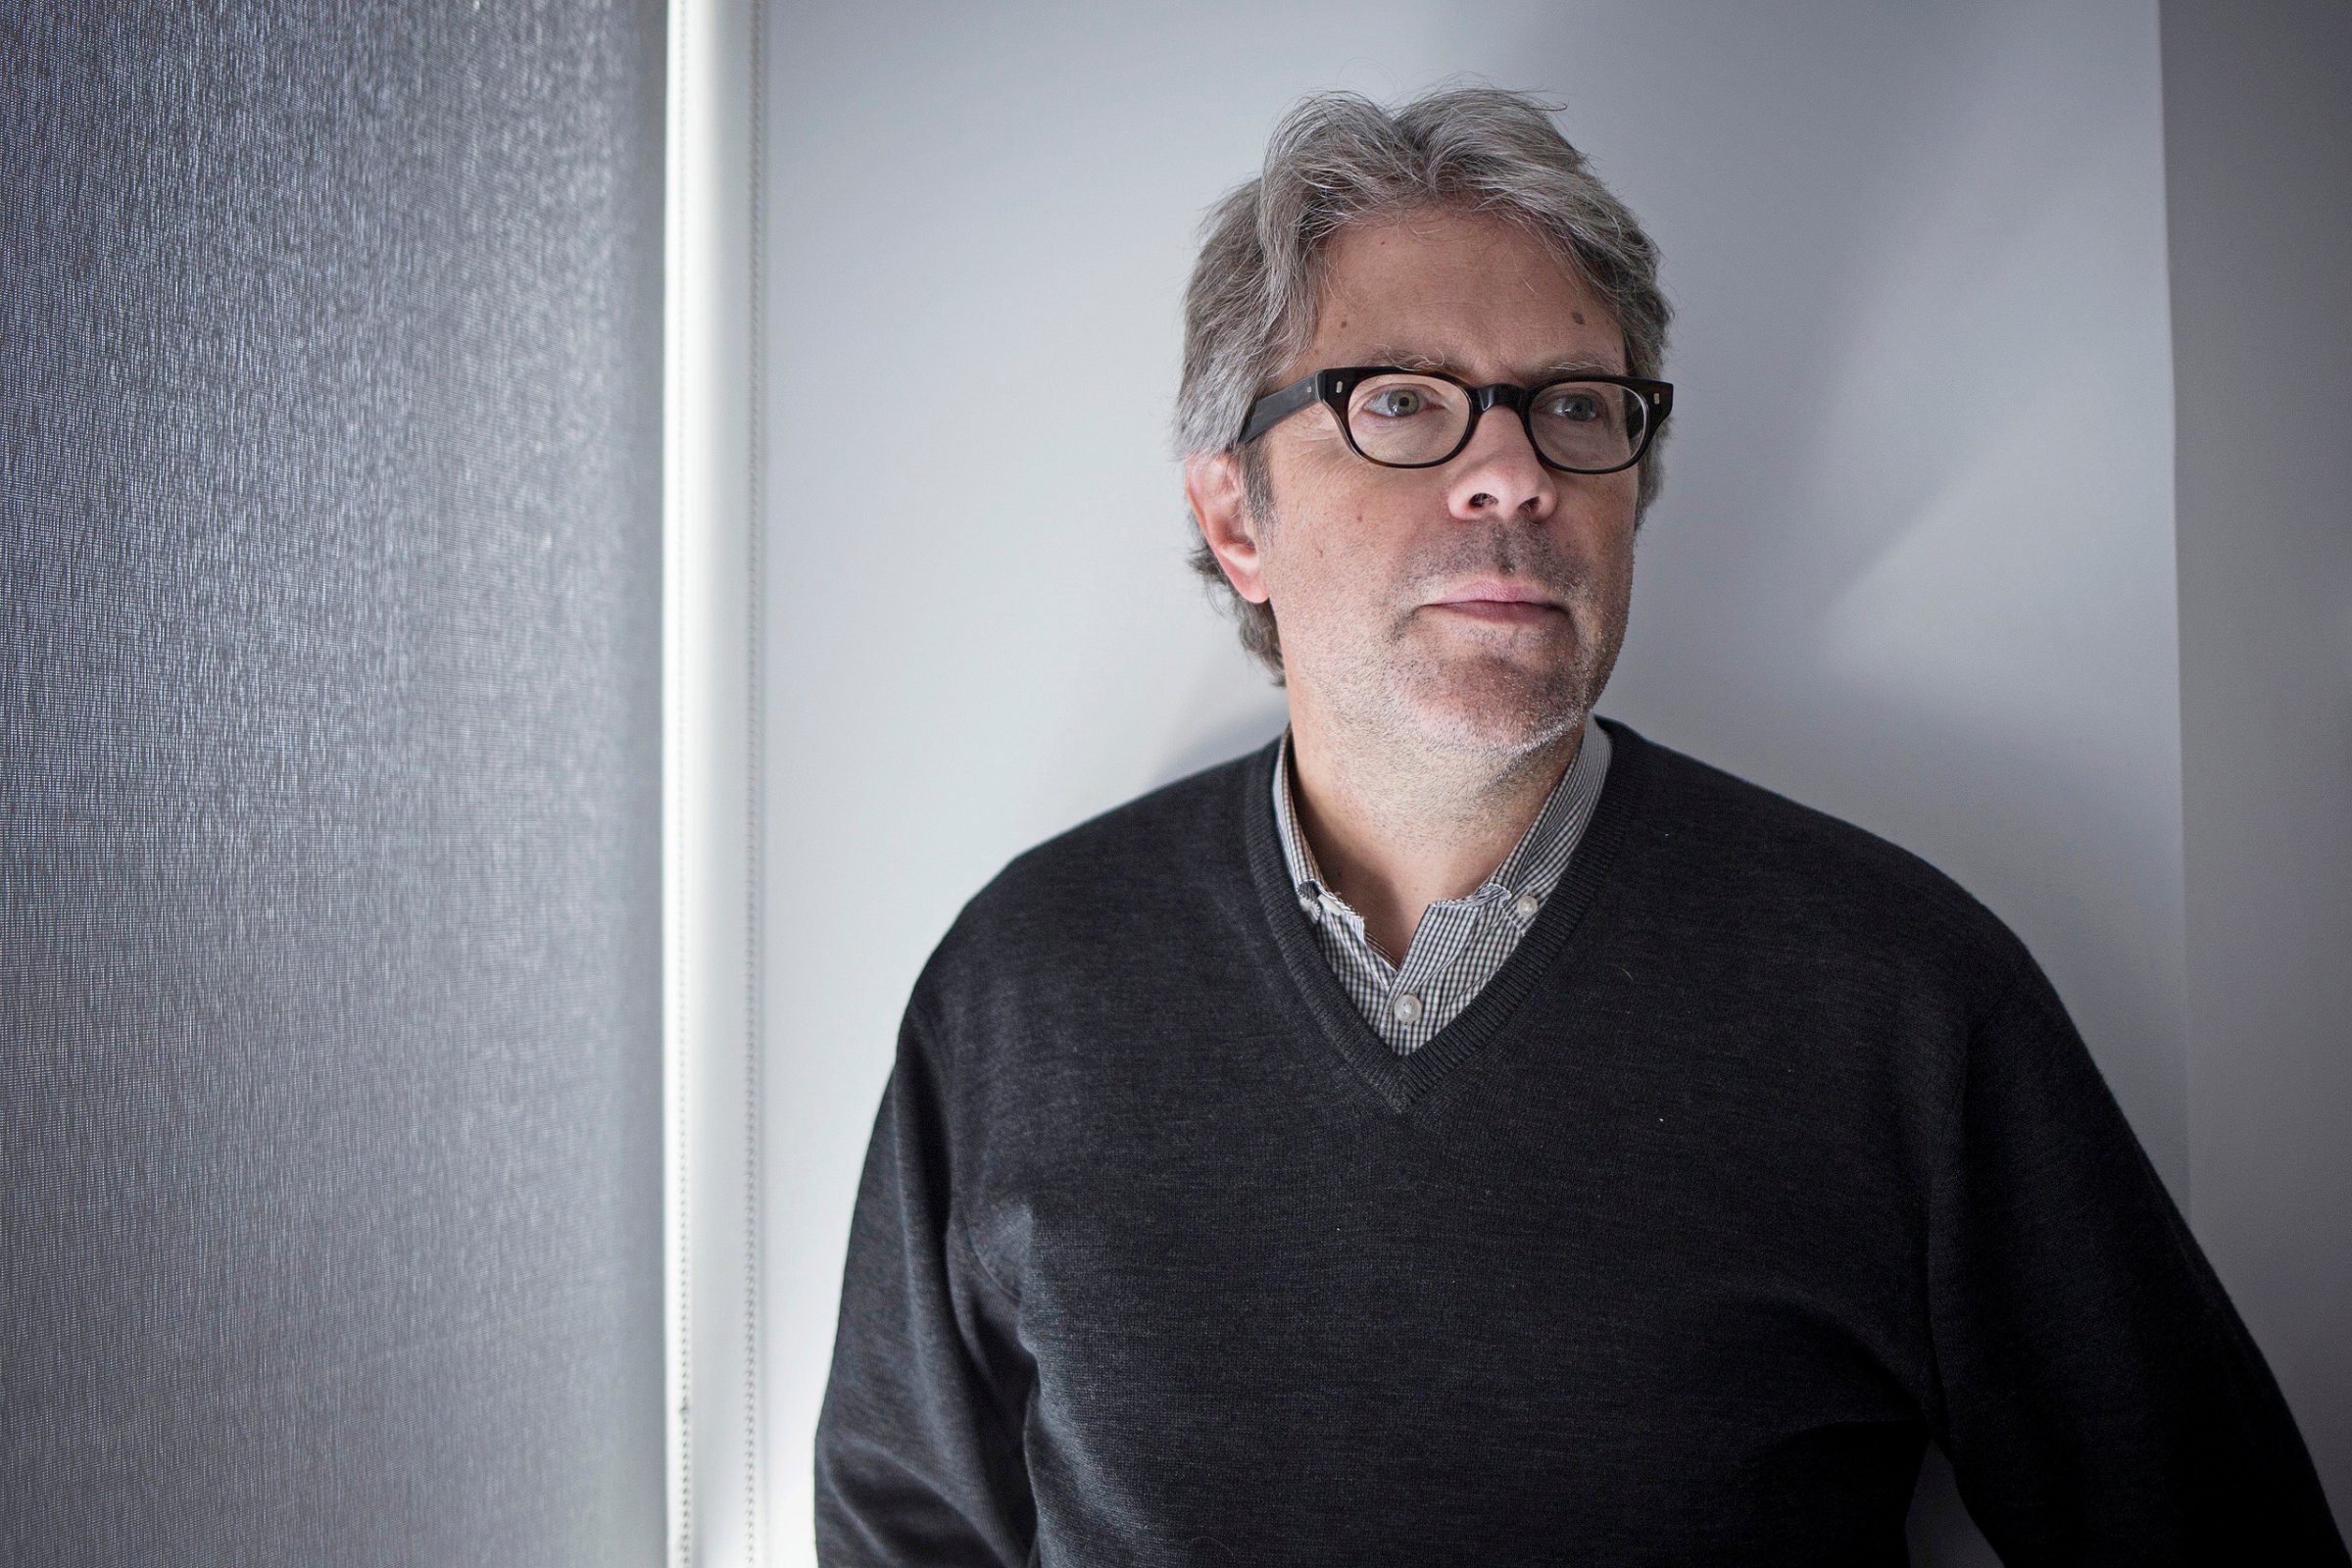 American novelist, Jonathan Franzen, discusses his latest book, Purity in Toronto on Oct. 11, 2015.